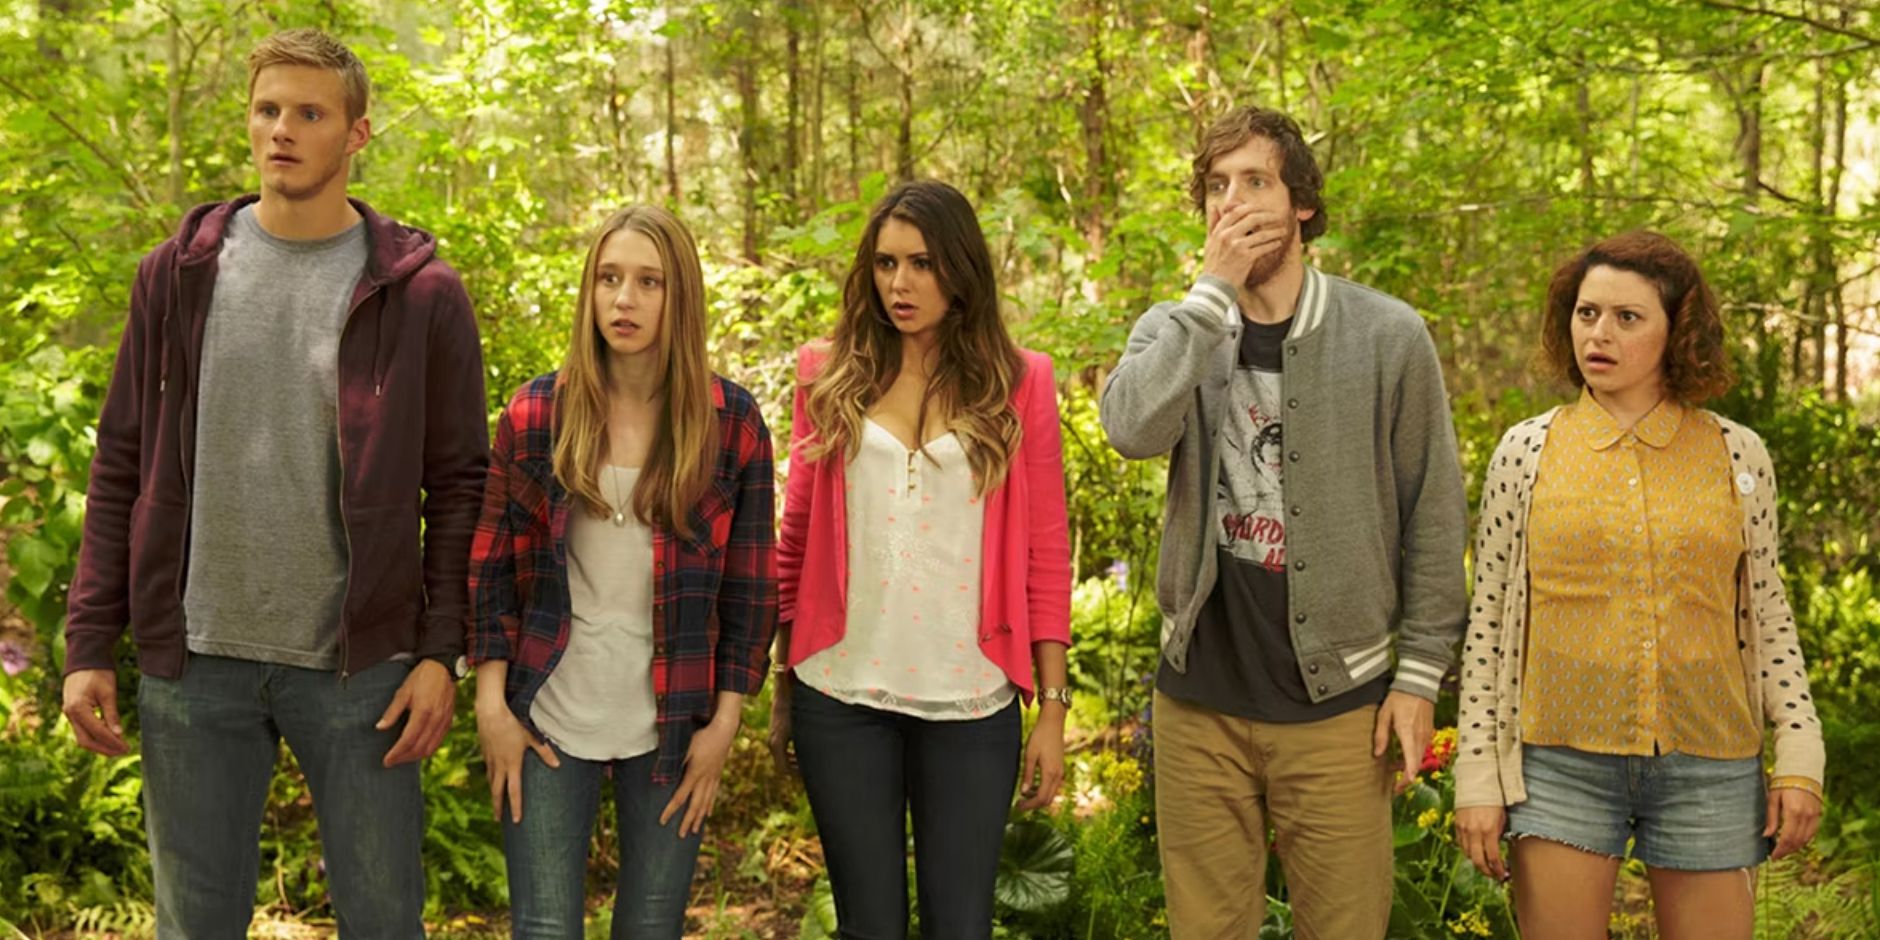 A group of five teens are shocked in the woods in The Final Girls